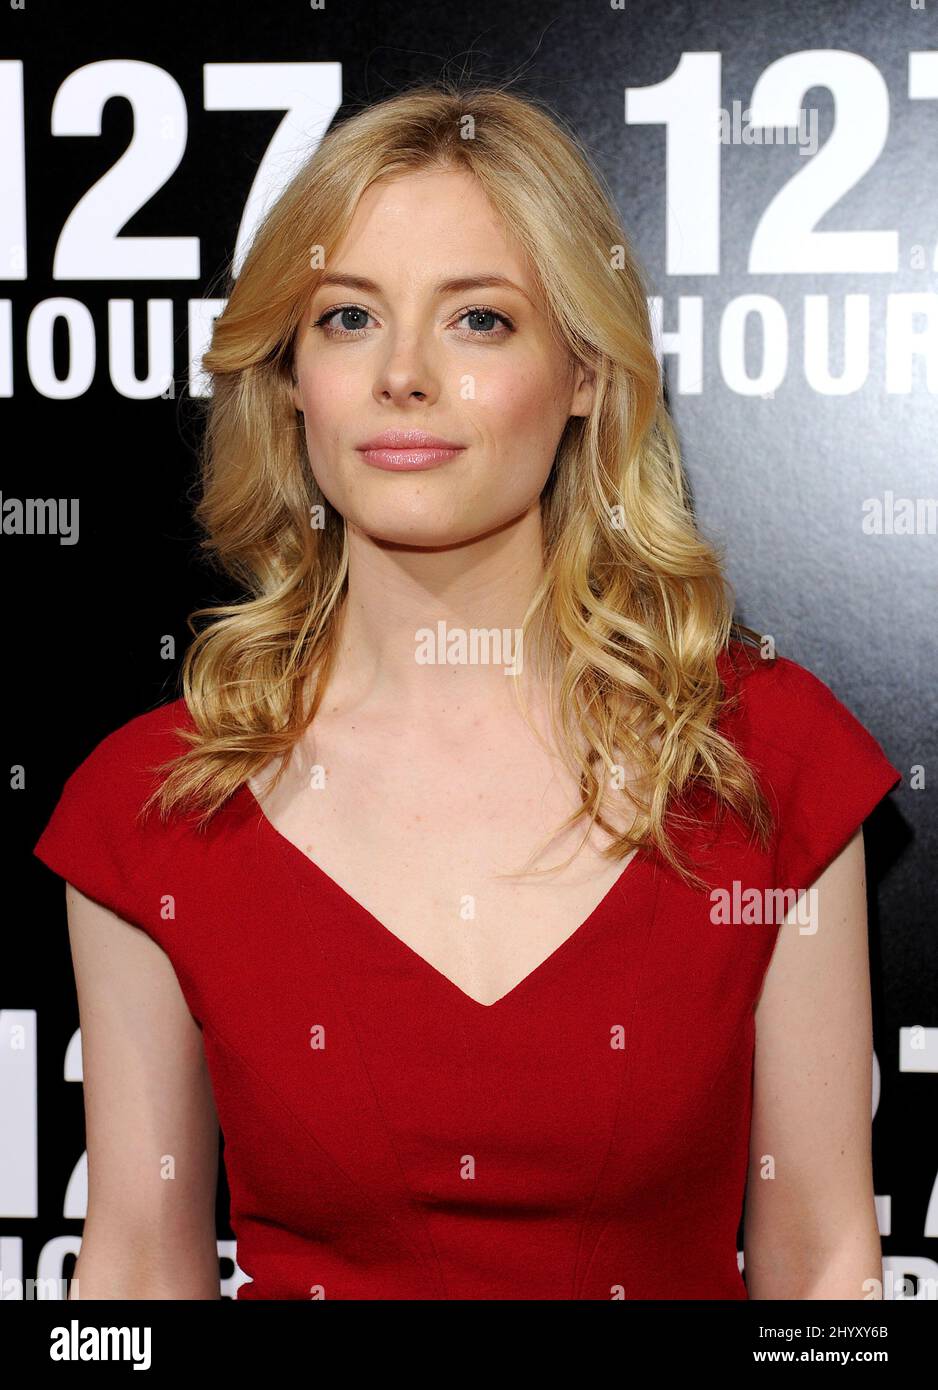 Gillian Jacobs at the premiere of '127 Hours' held at Samuel Goldwyn Theater in Los Angeles, USA. Stock Photo